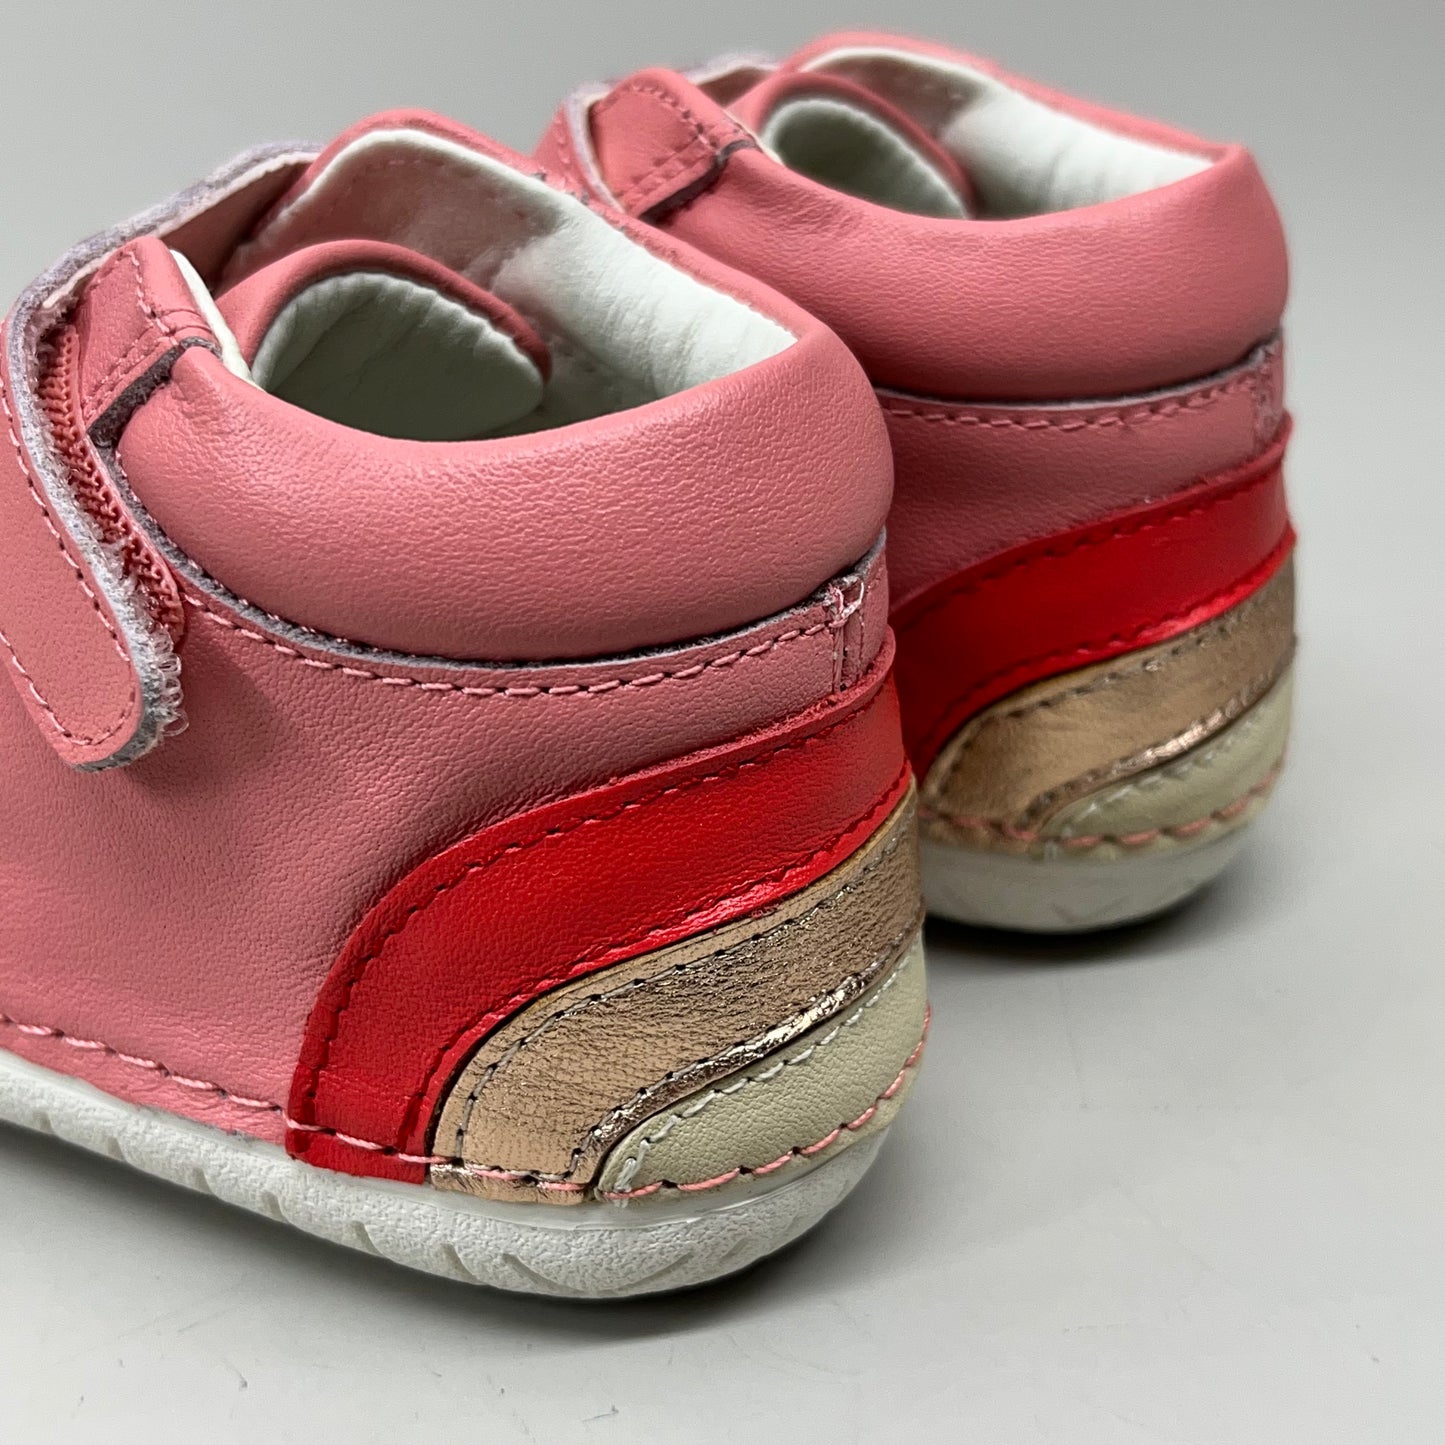 OLD SOLES Baby Rainbow Champster Leather Shoe Sz 20 US 4 Rossini/Red/Copper/Cream #4091